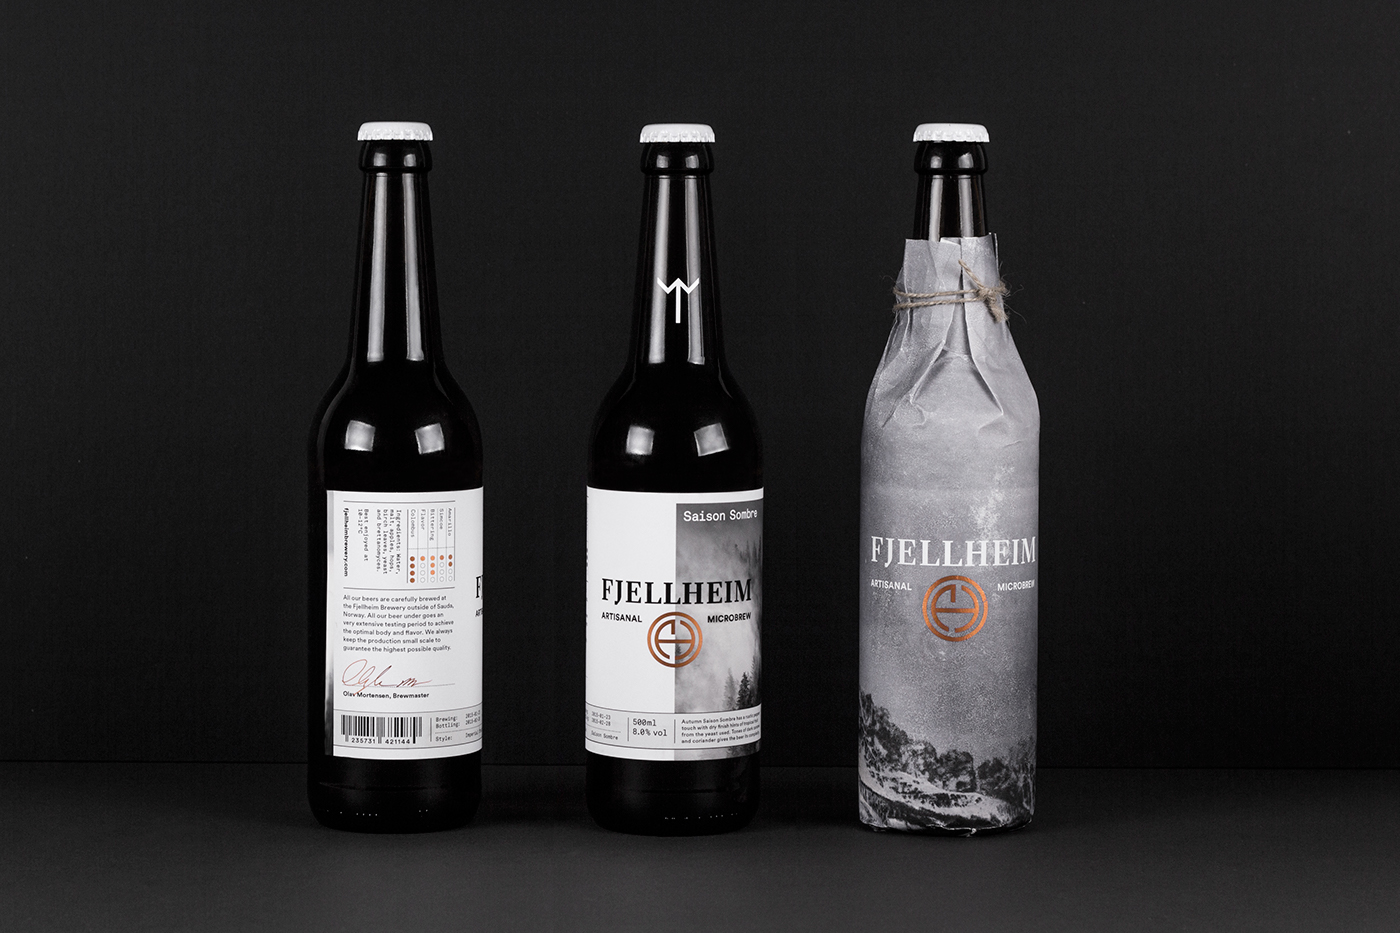 beer microbrew Microbrewery norway artisanal Terroir seassons brew traditional New Nordic copper